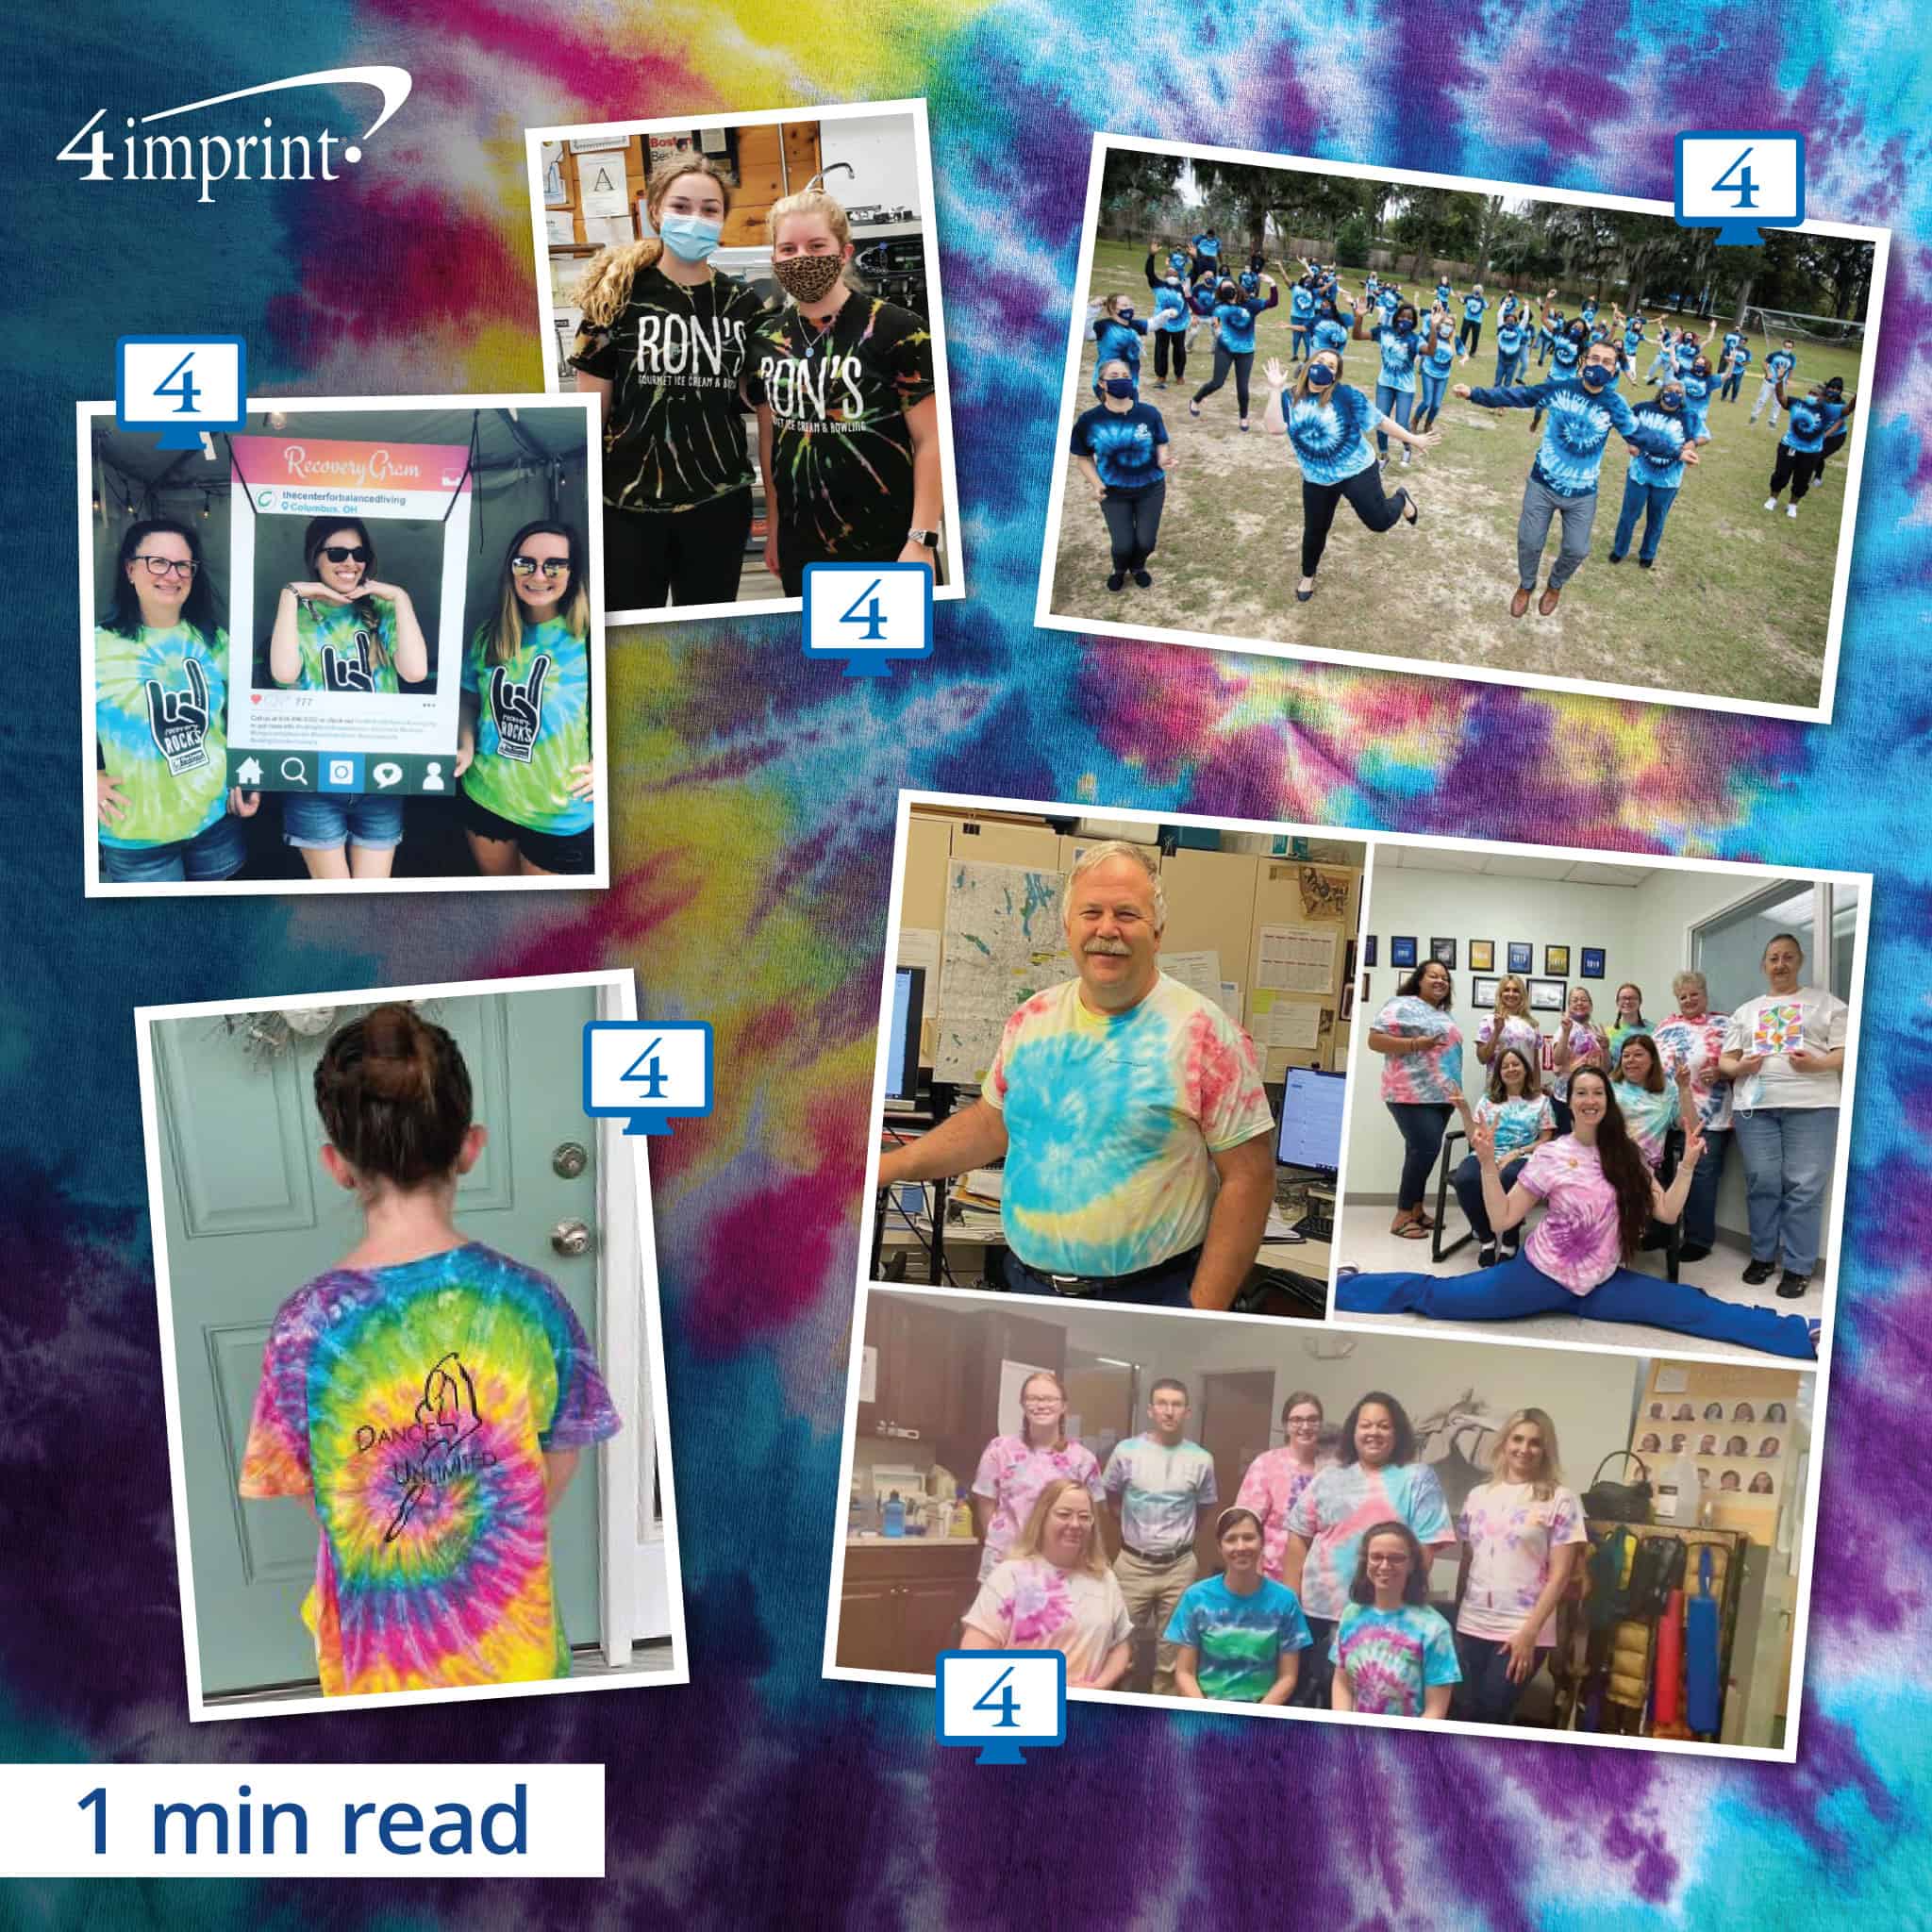 Collage of people in tie-dye shirts.